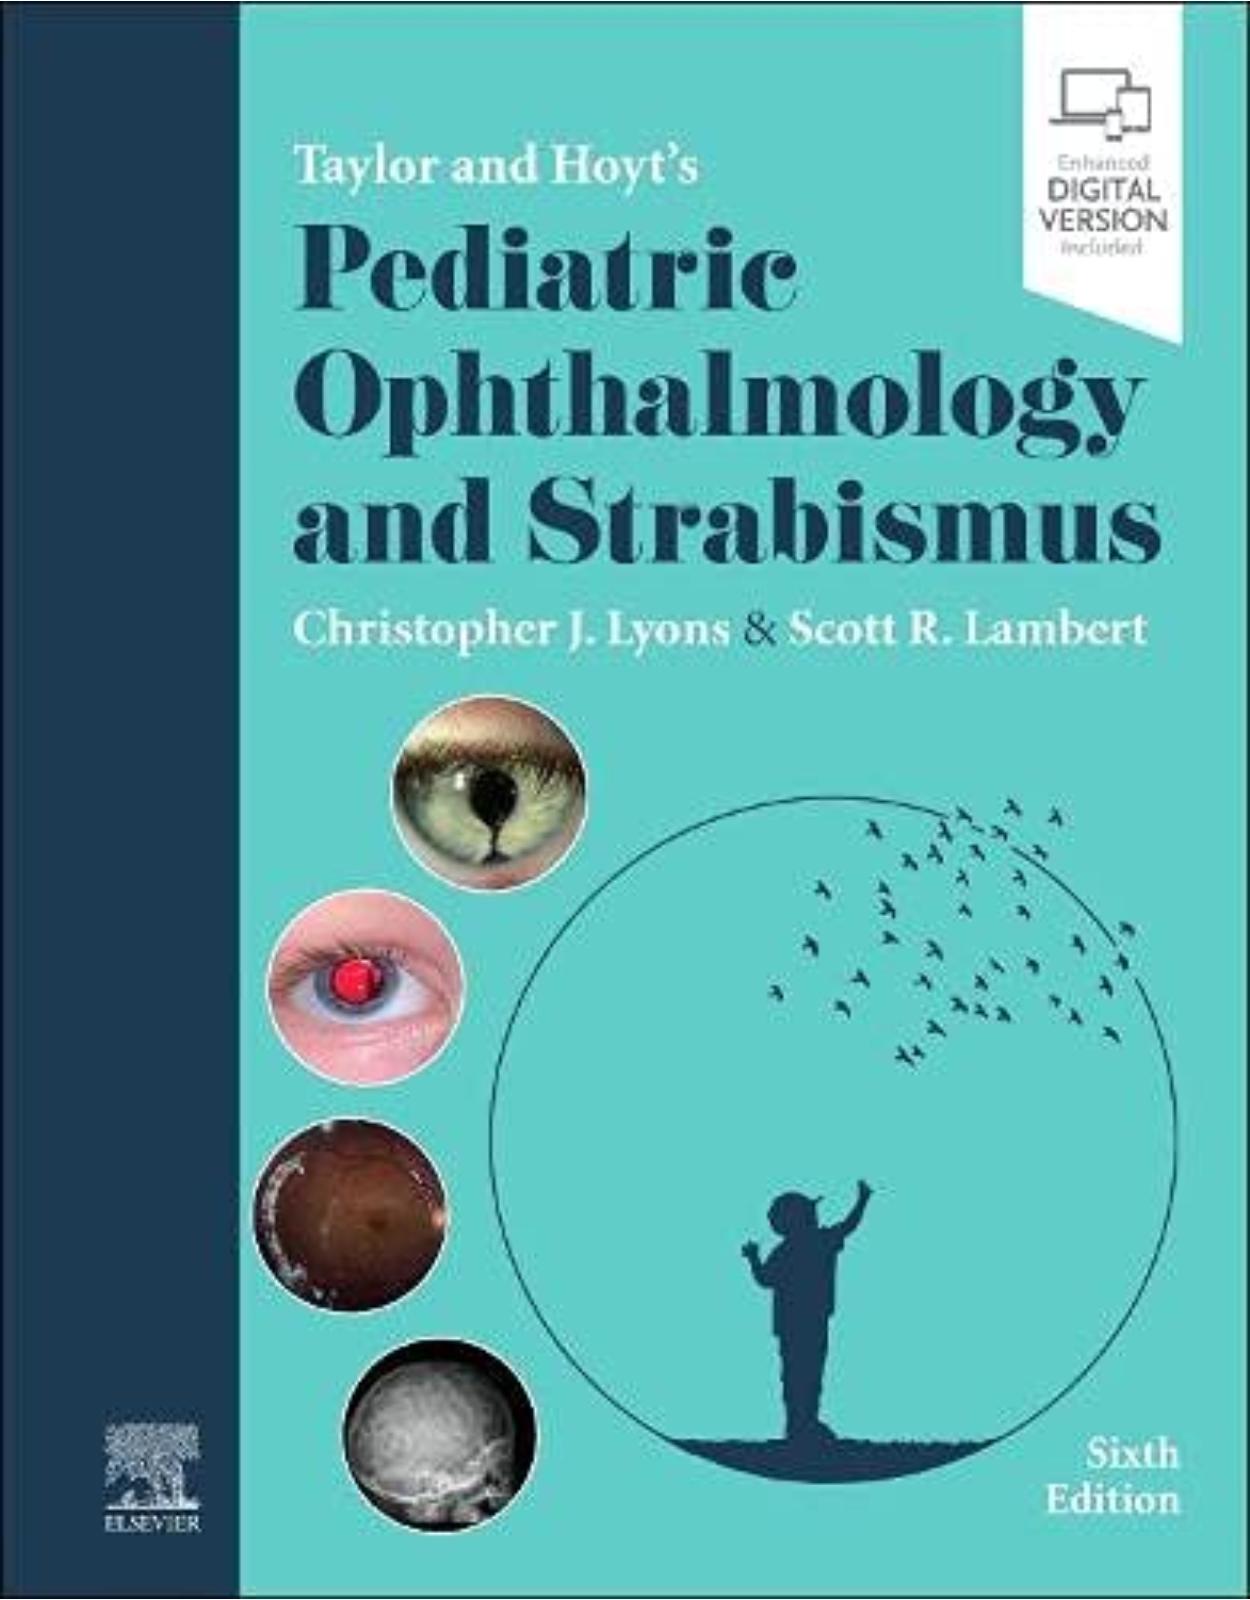 Taylor and Hoyt’s Pediatric Ophthalmology and Strabismus